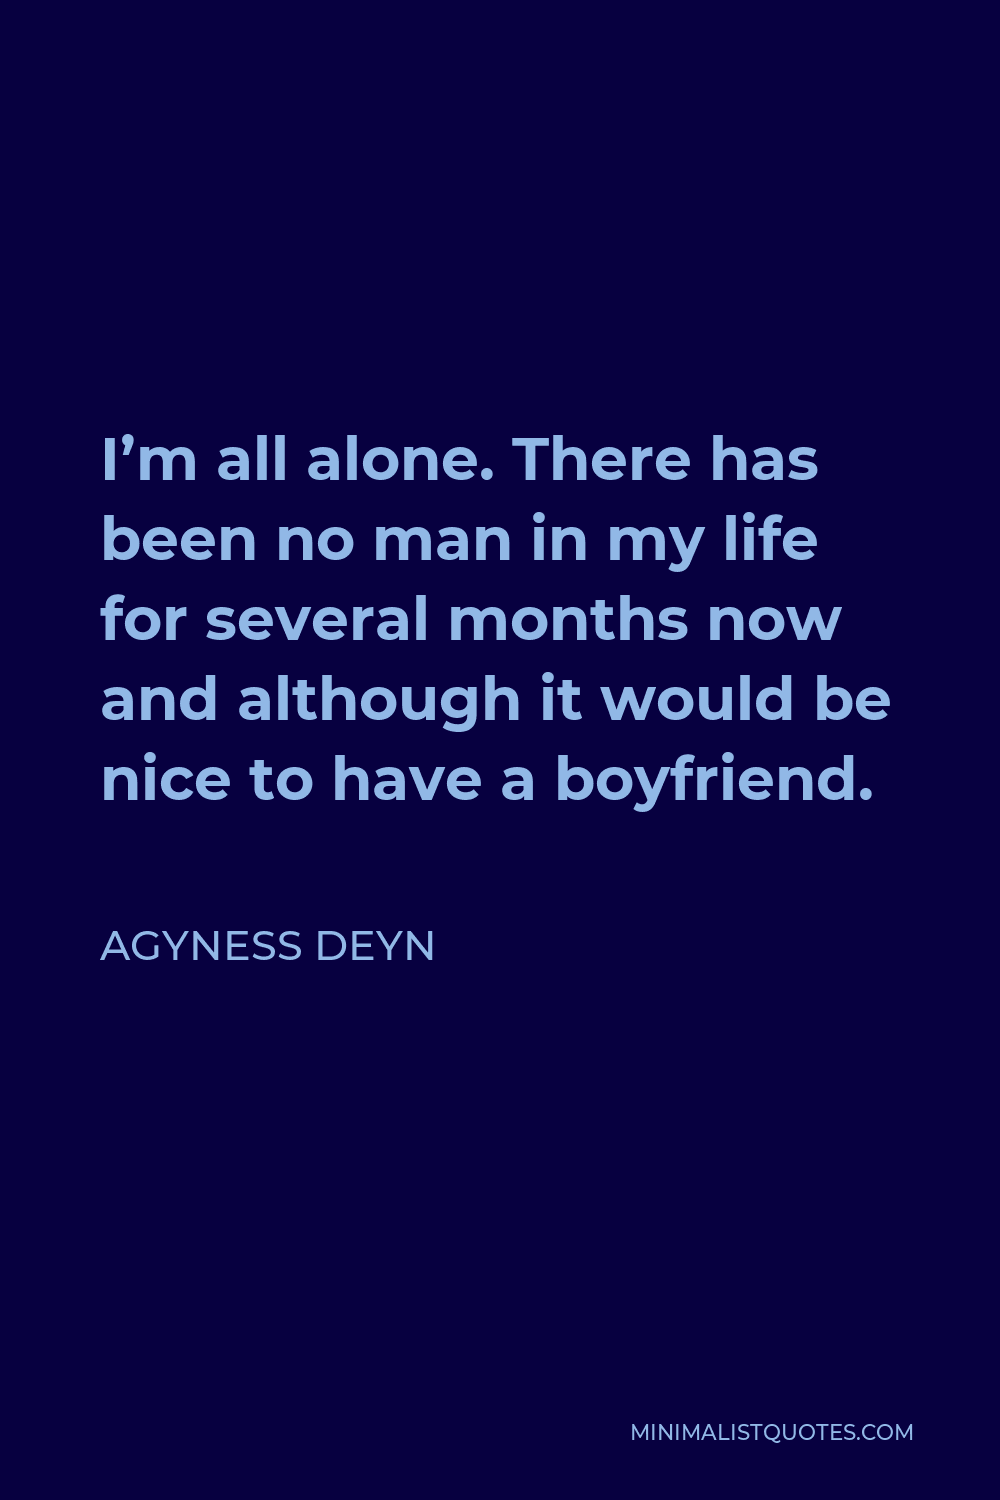 Agyness Deyn Quote - I’m all alone. There has been no man in my life for several months now and although it would be nice to have a boyfriend.